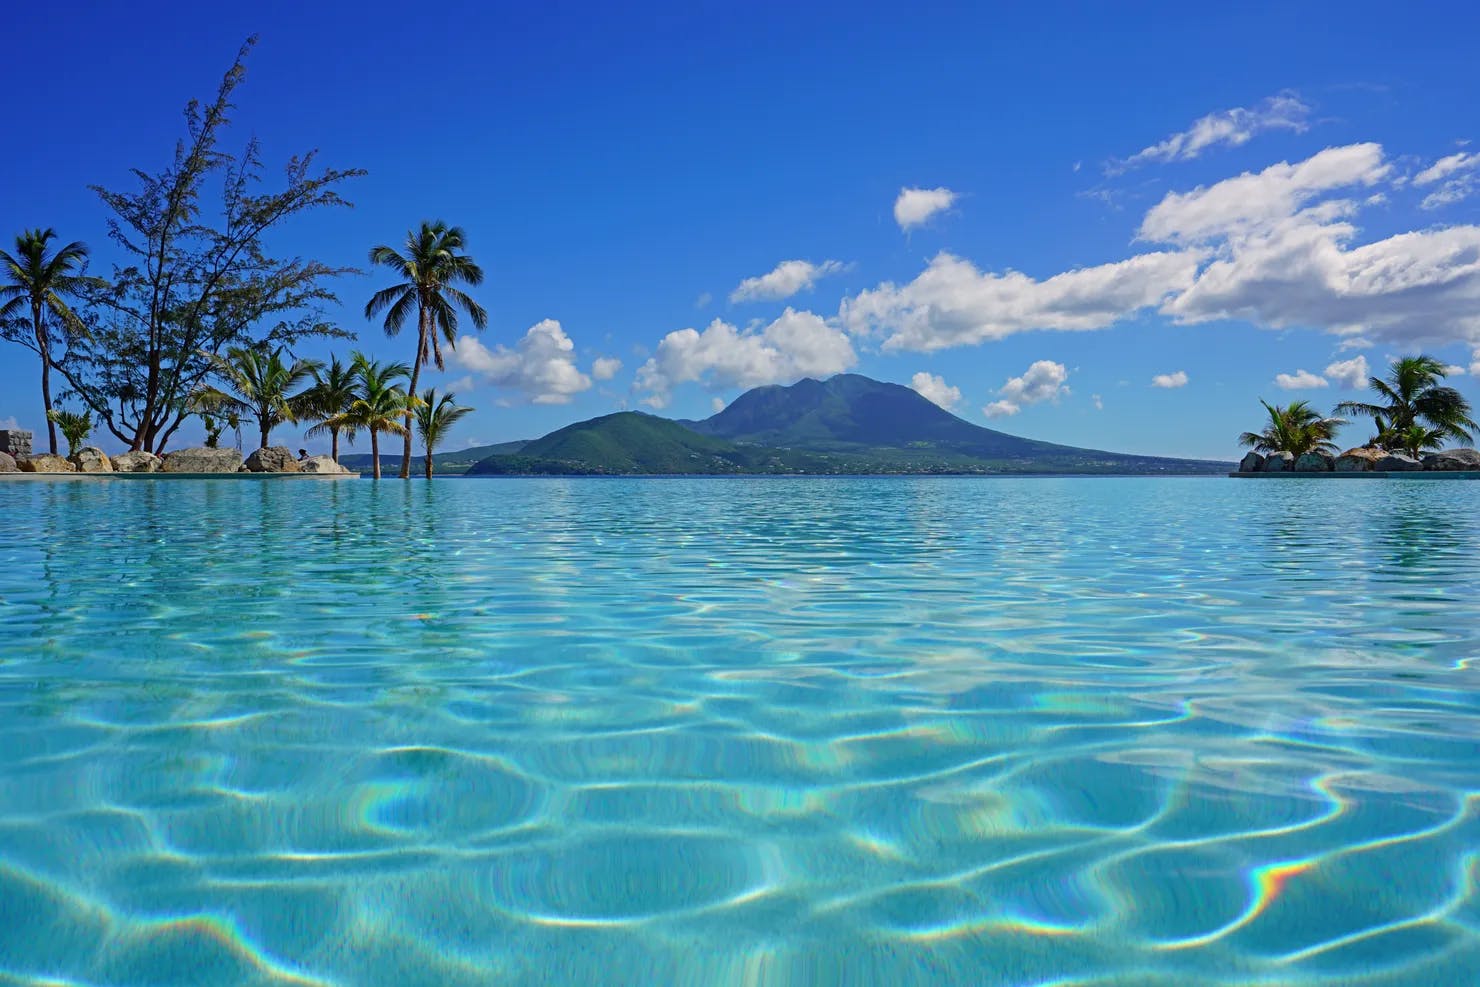 View of the Nevis Peak volcano from a swimming pool in Christopher Harbour, St Kitts, the Caribbean